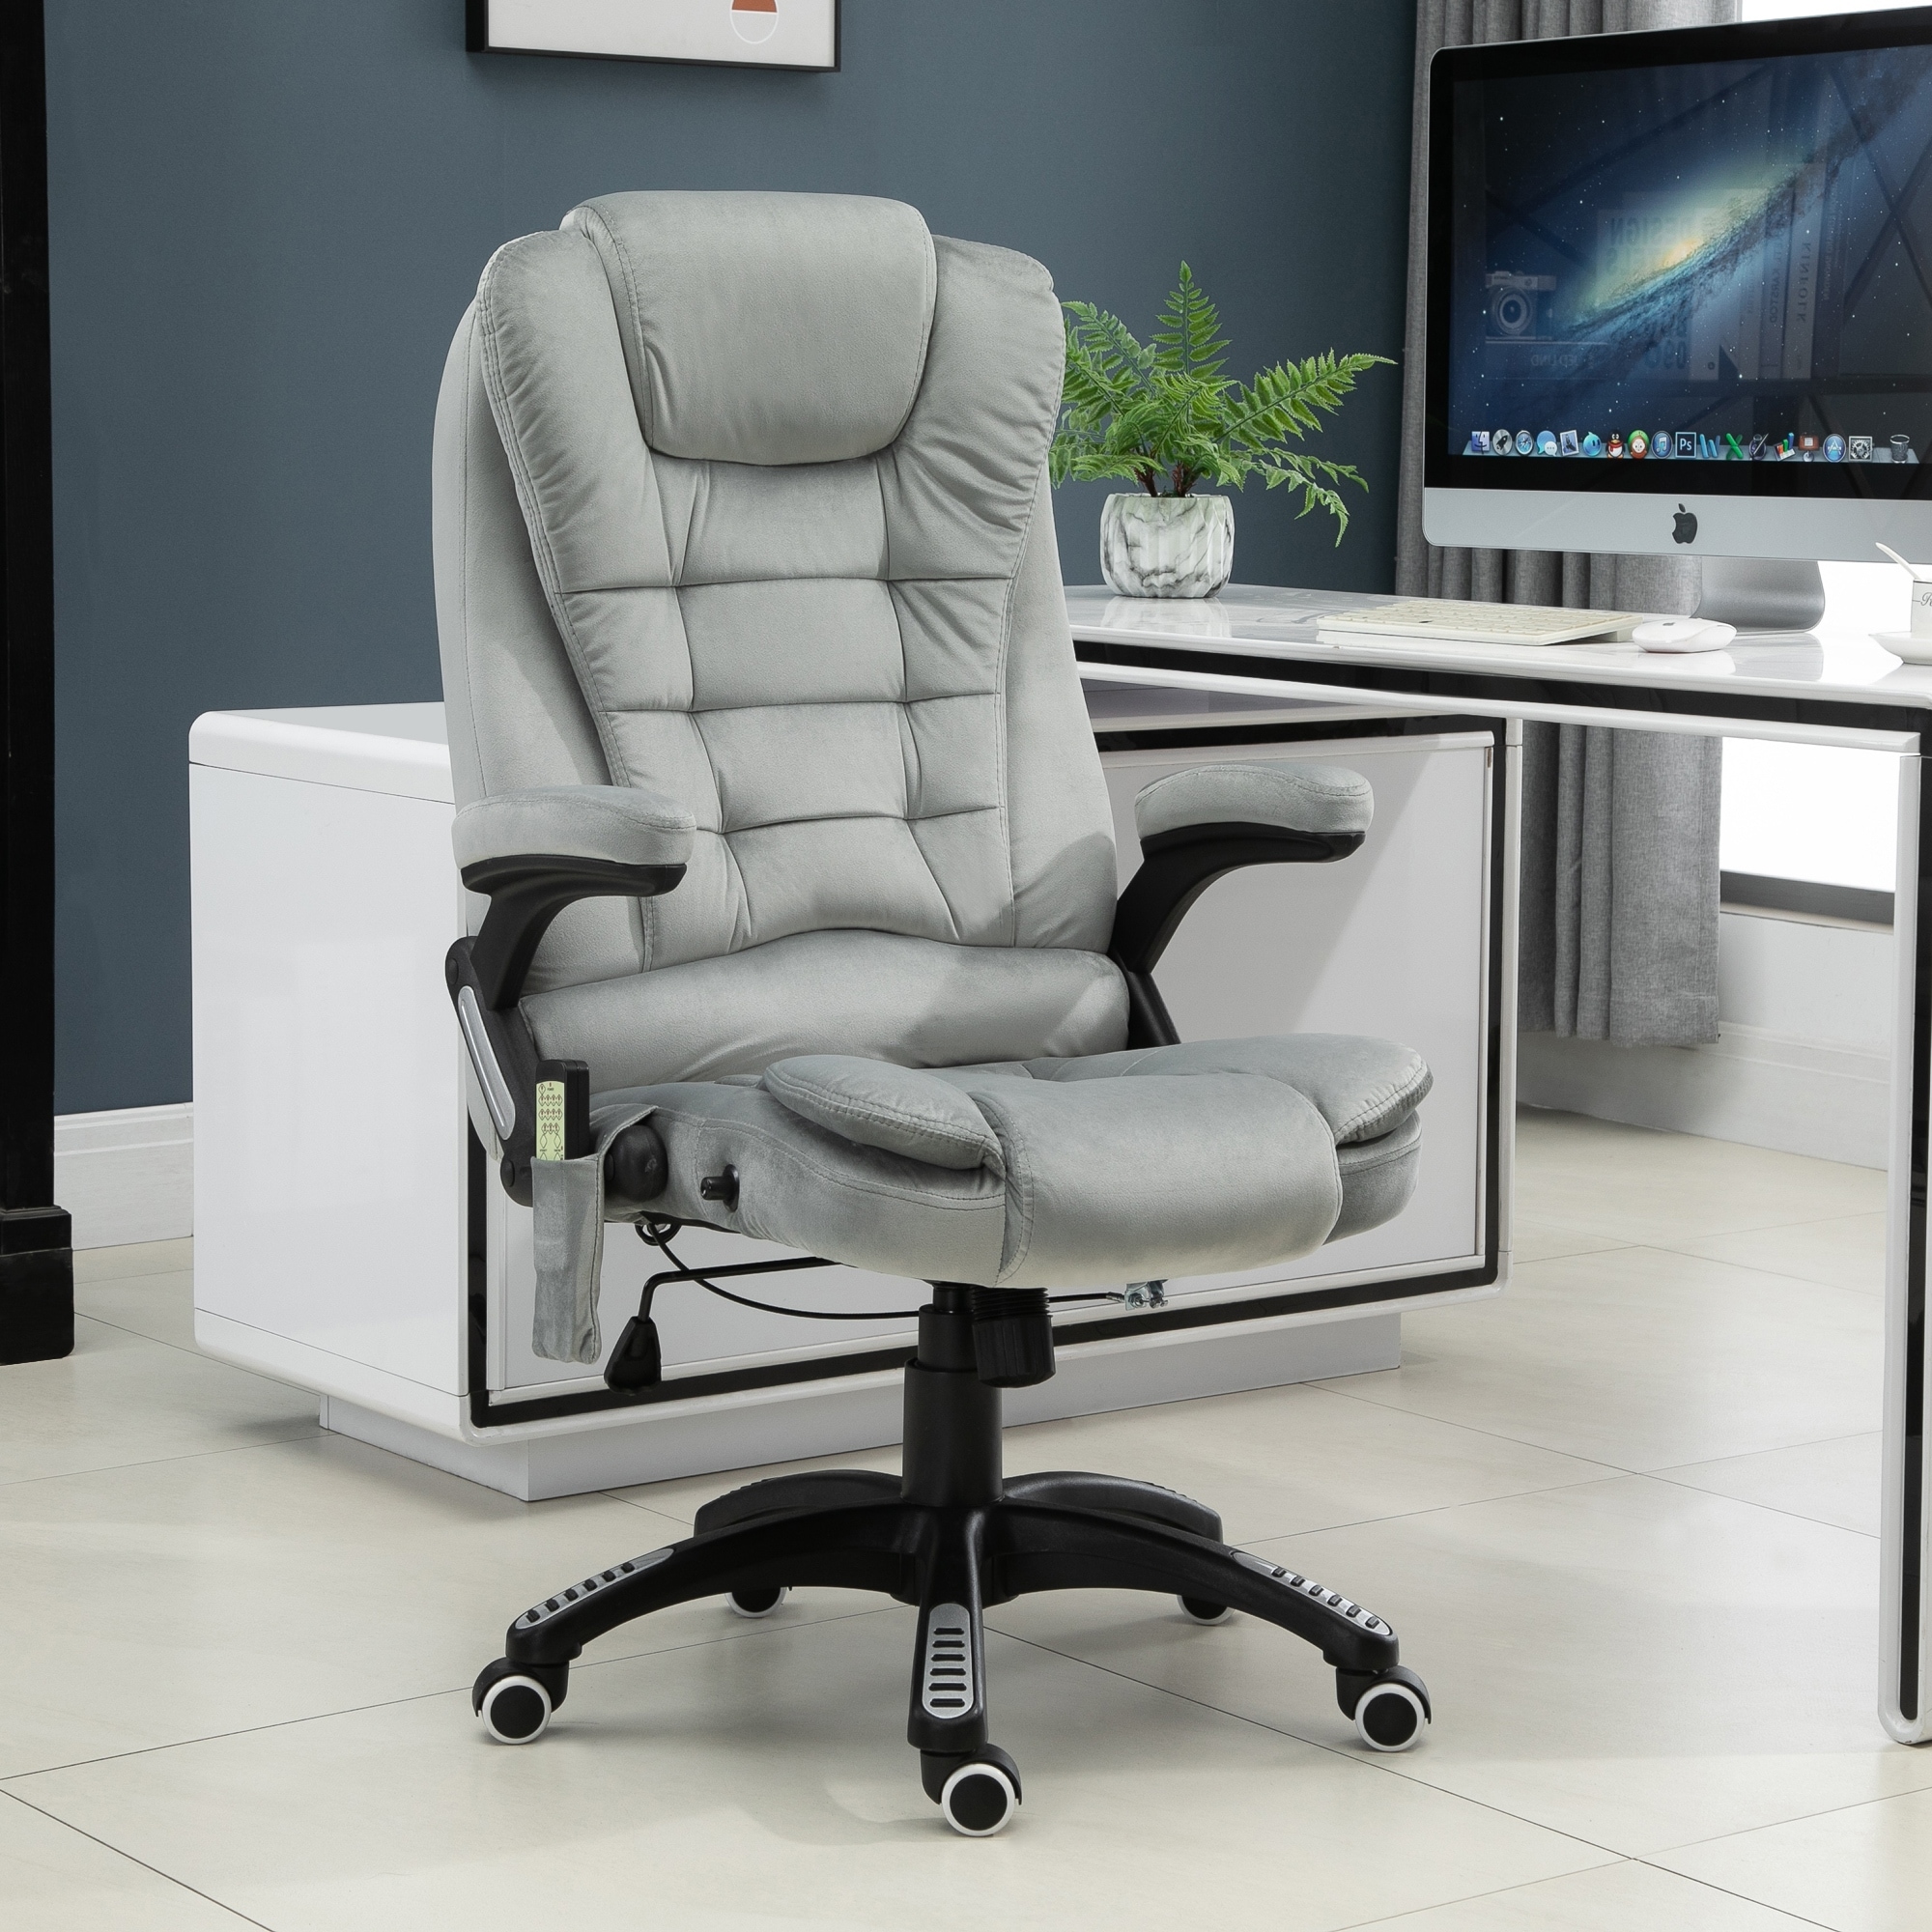 Home Office Desk Chairs High Back Ergonomic Executive Chair Swivel Task Chair 